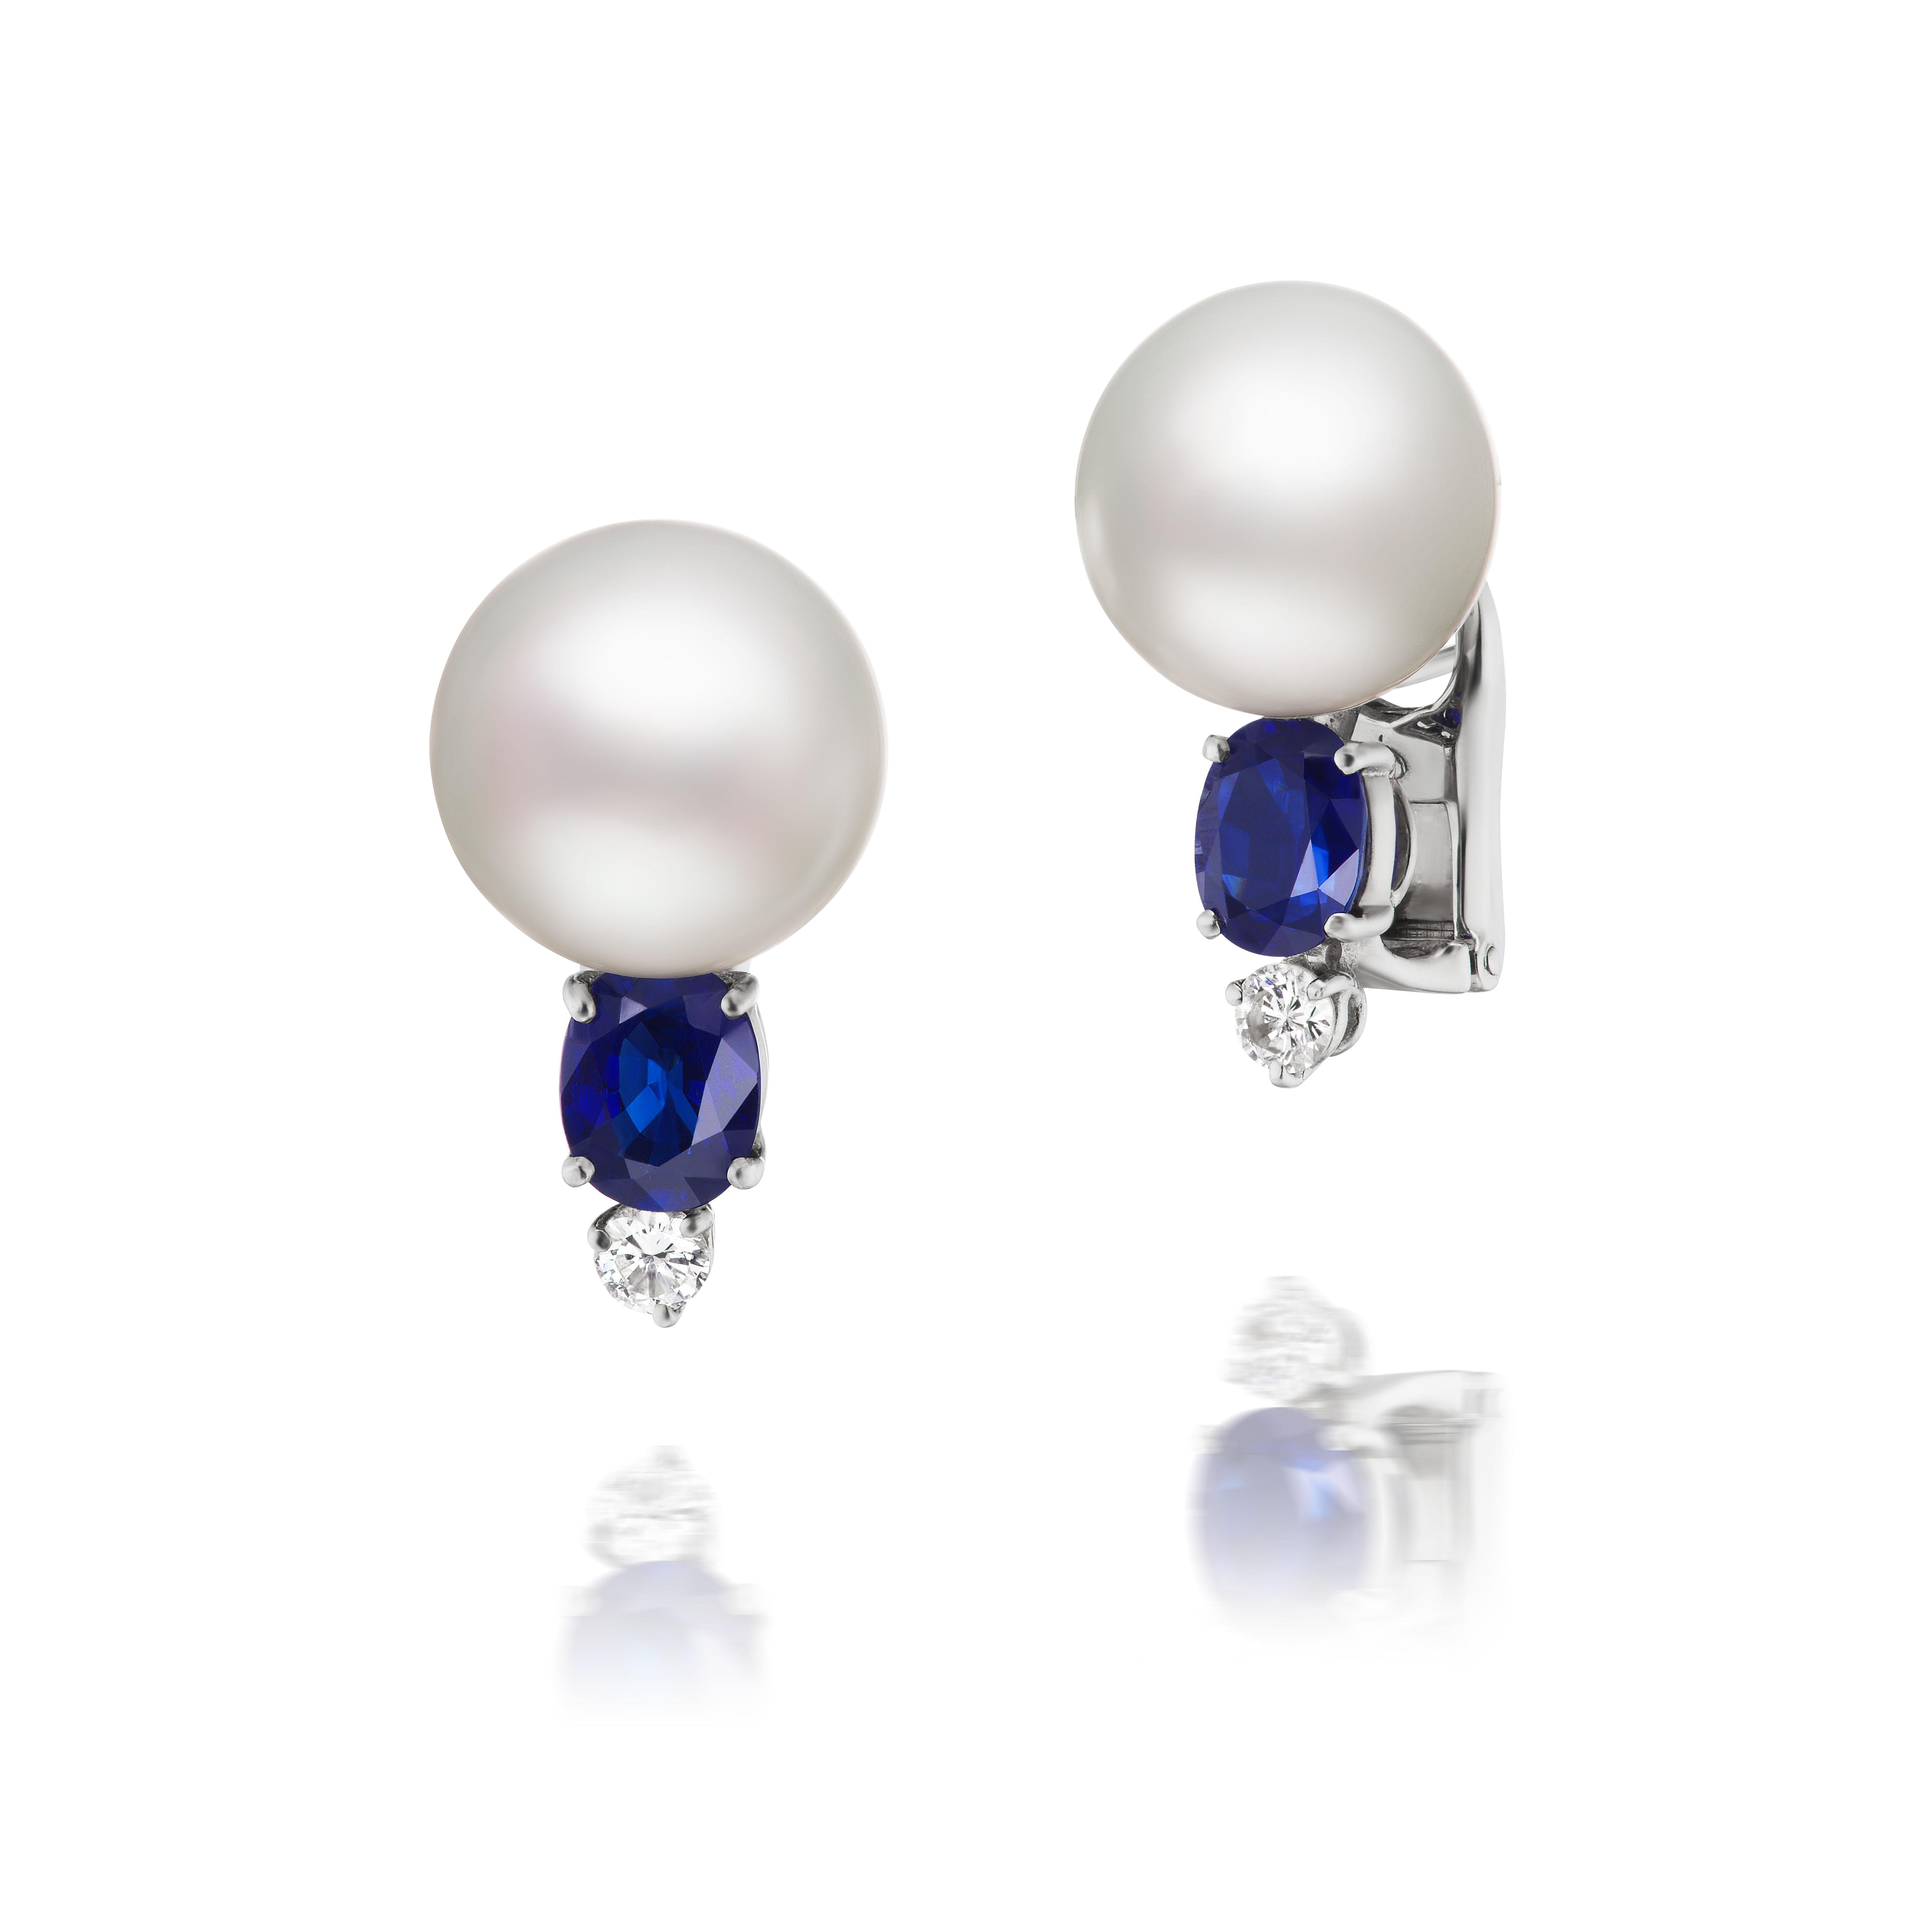 Two lovely 14mm South Sea pearls are adorned with oval-cut blue sapphires weighing approximately 1.50 carats total and round brilliant diamonds weighing approximately .30 carats total and mounted in platinum.

The sapphires are a wonderful deep blue